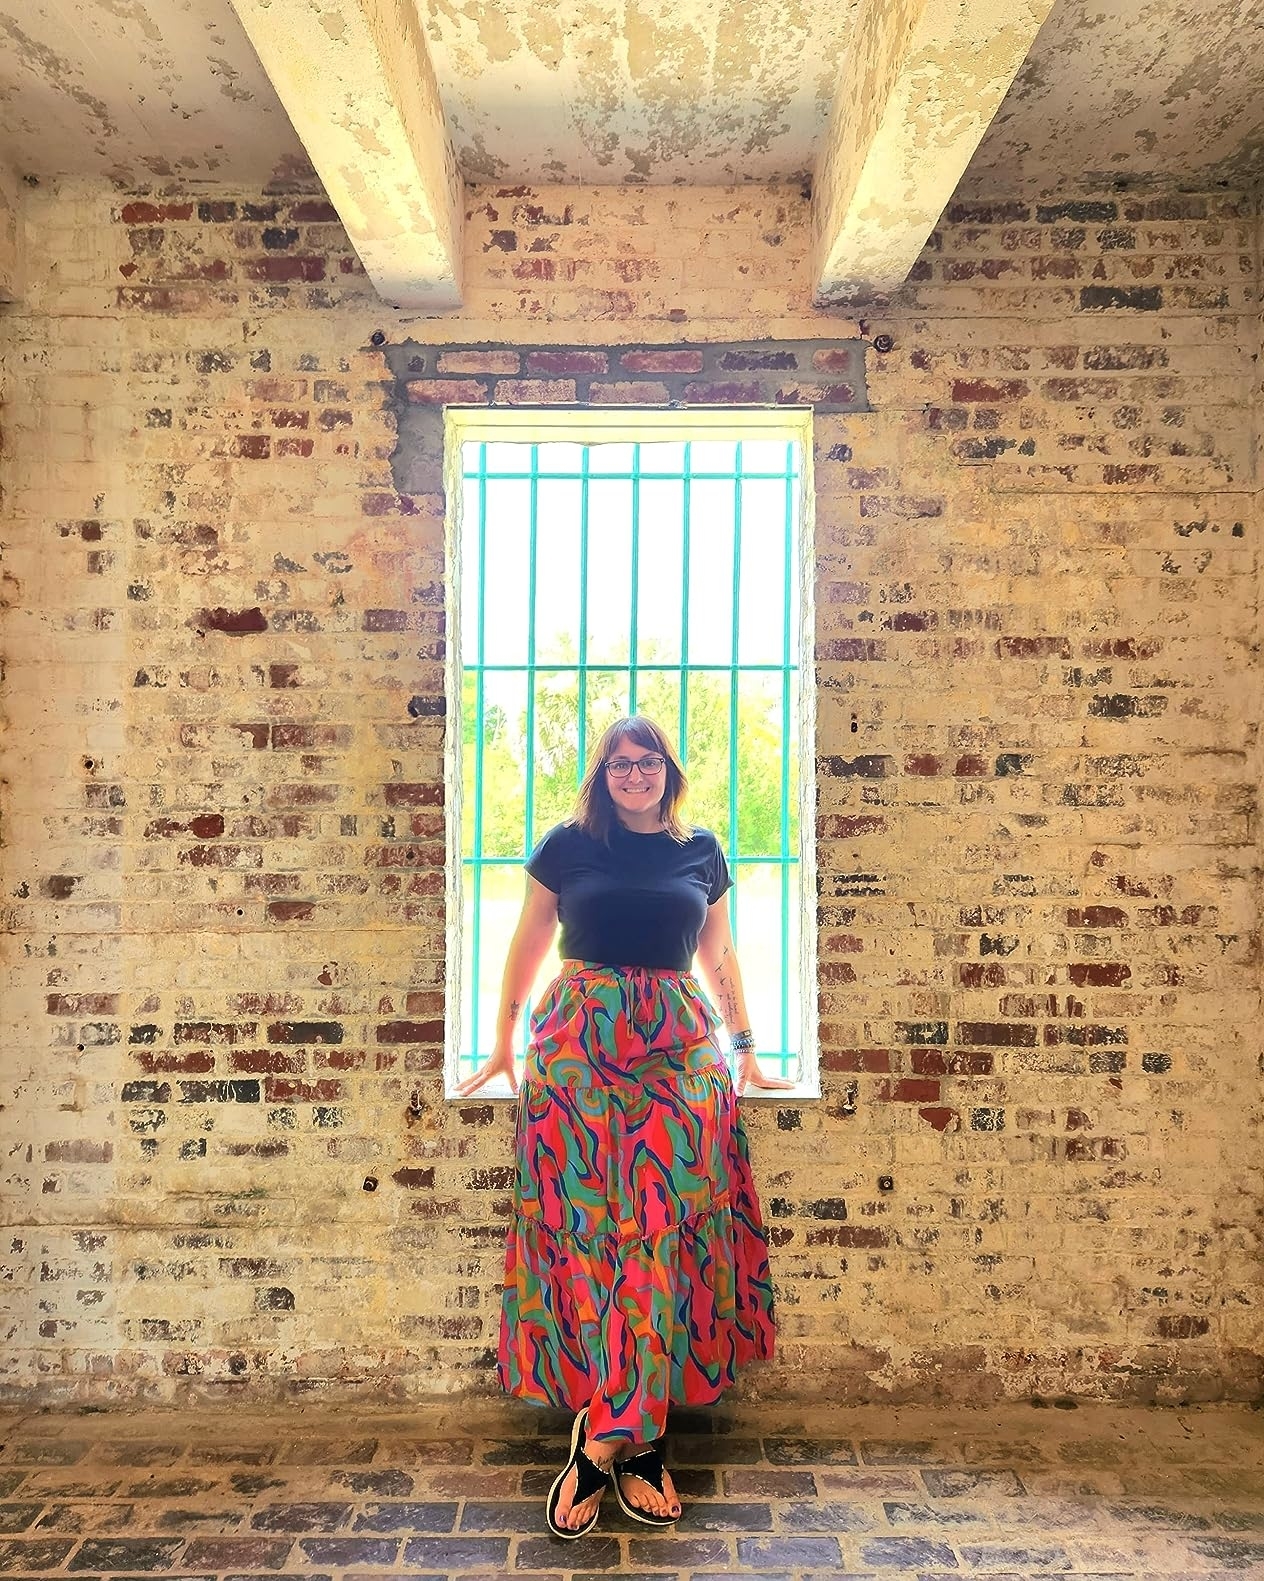 A reviewer stands in front of a window wearing a black top and a long, patterned skirt with flip-flops. The setting has rustic brick walls